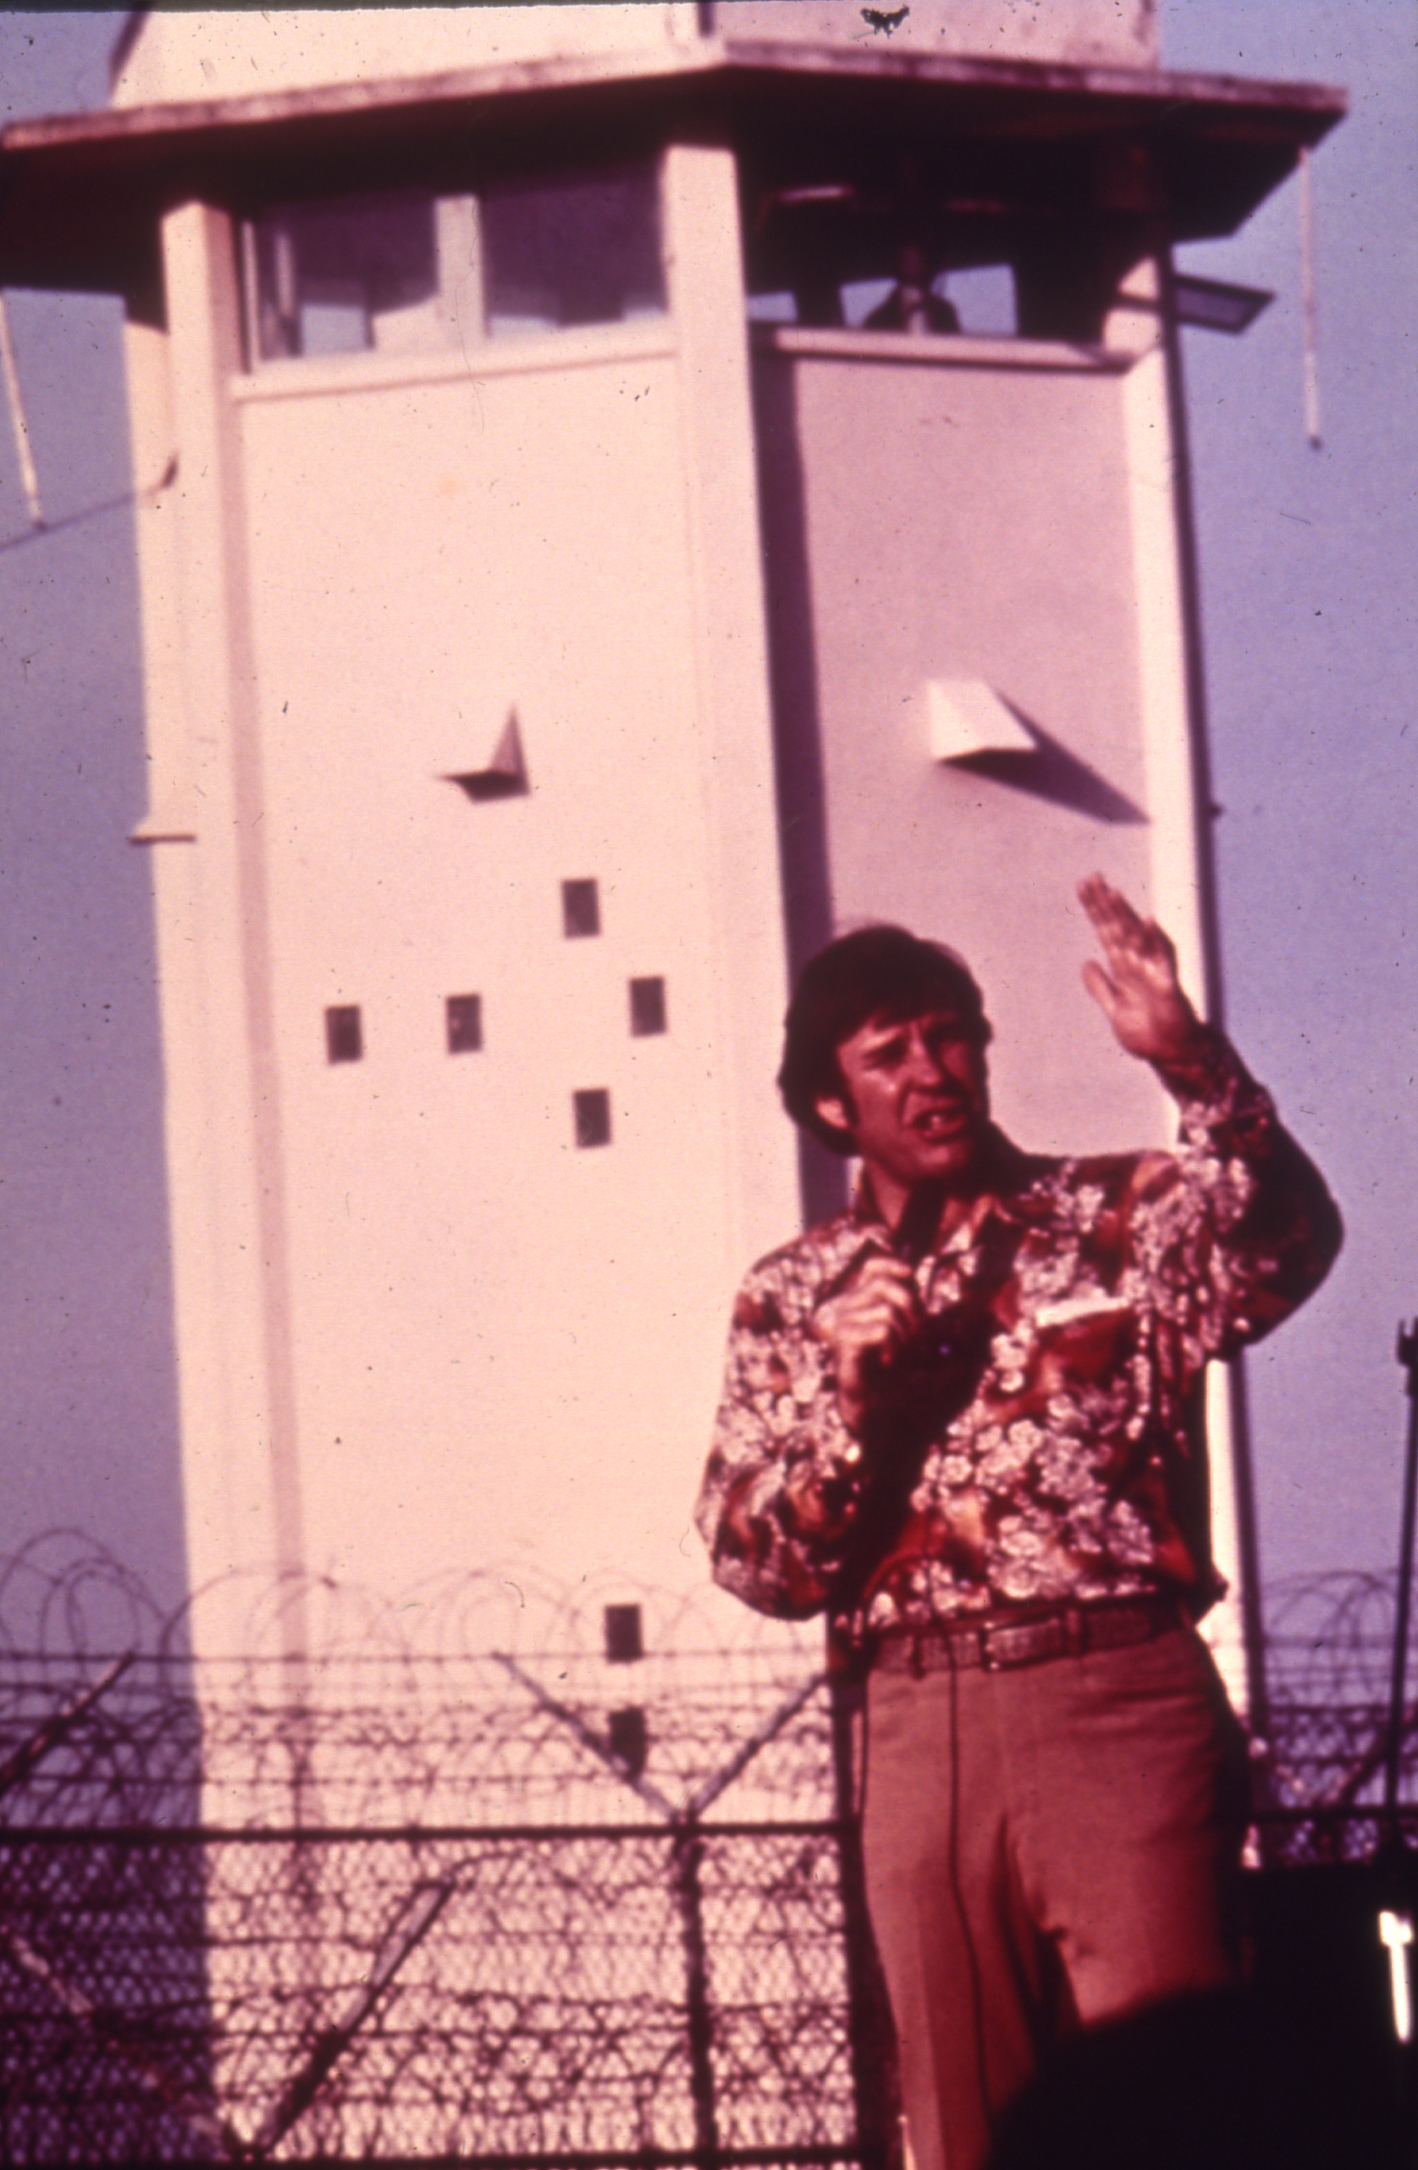 Slide 4: A photo of Bill Glass (a linebacker for the Cleveland Browns and prison evangelist) speaking at Florida State Prison in 1973 or 1974.